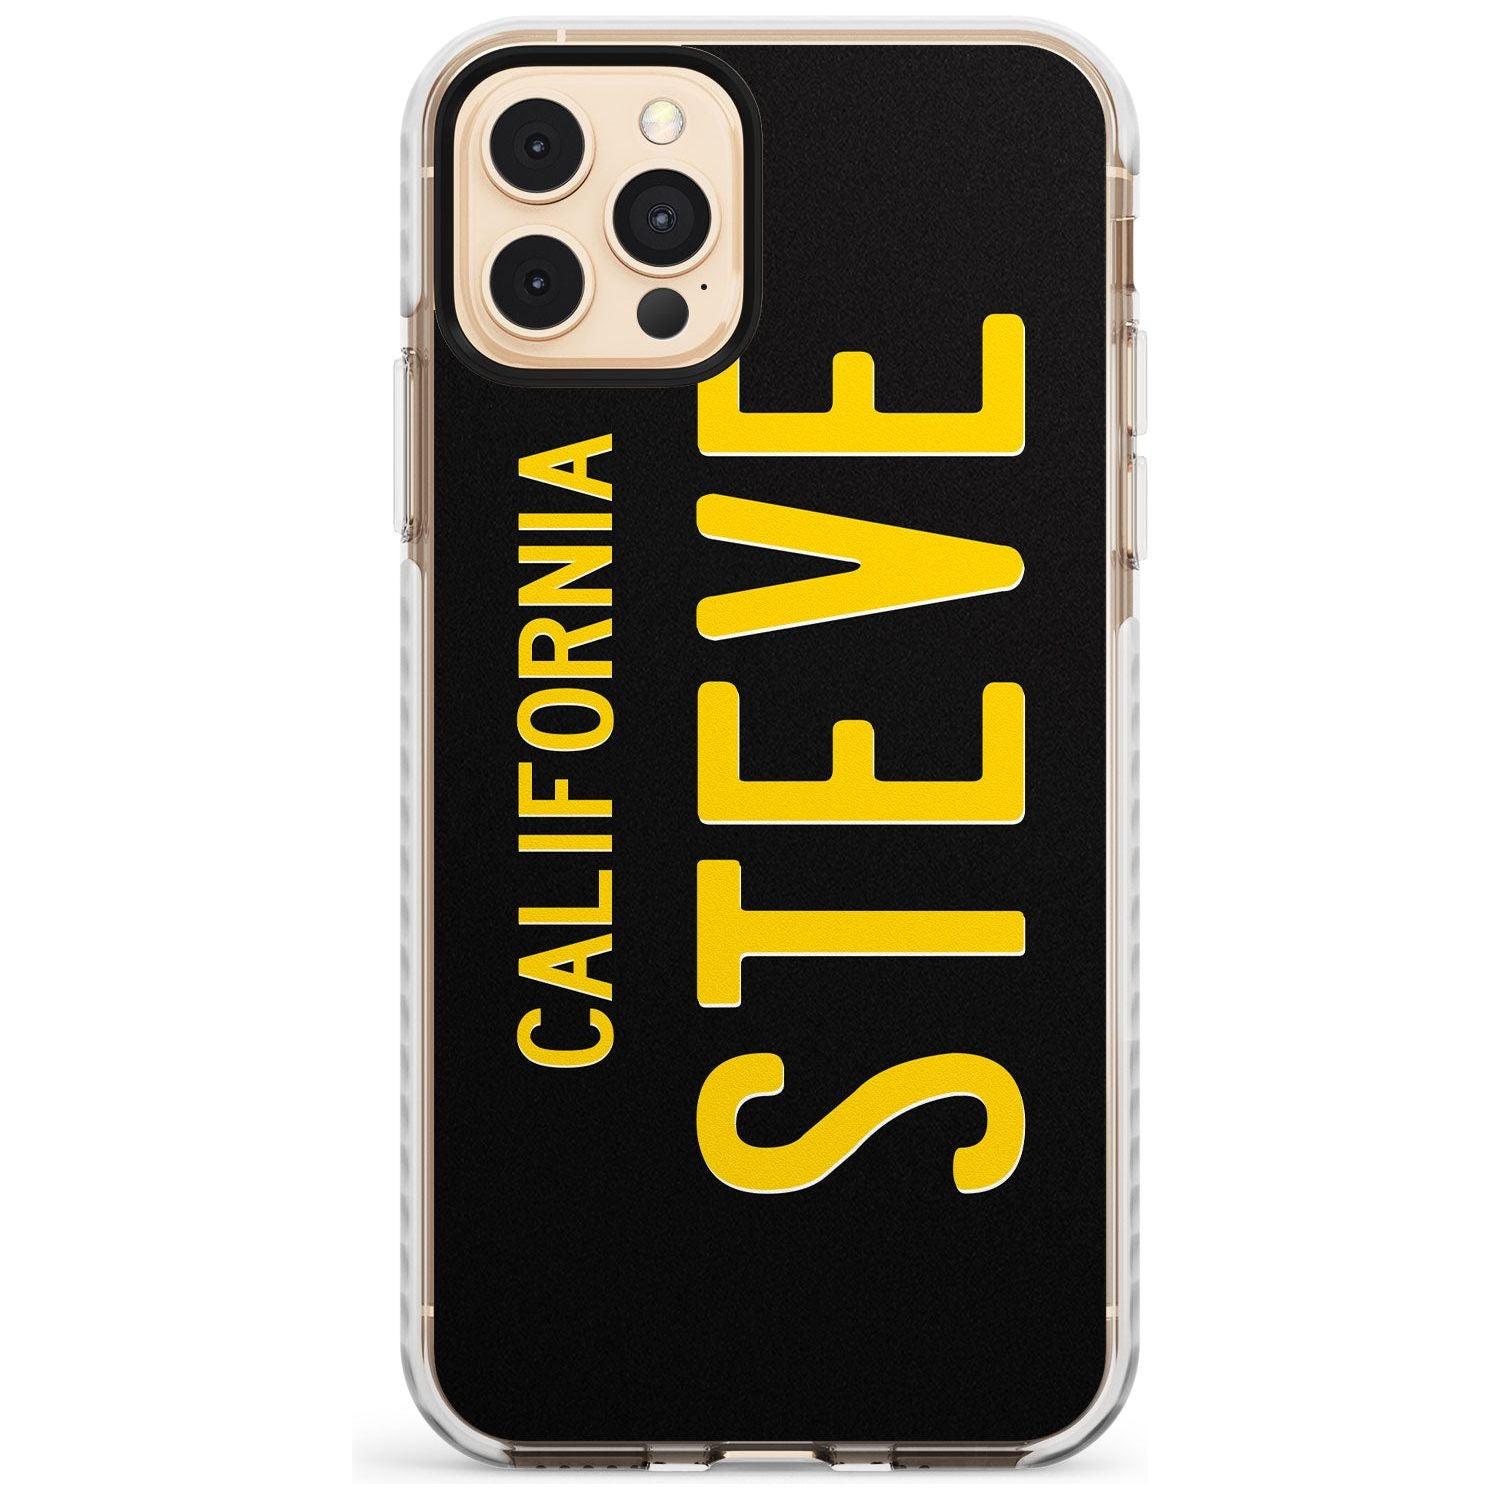 Vintage California License Plate Slim TPU Phone Case for iPhone 11 Pro Max